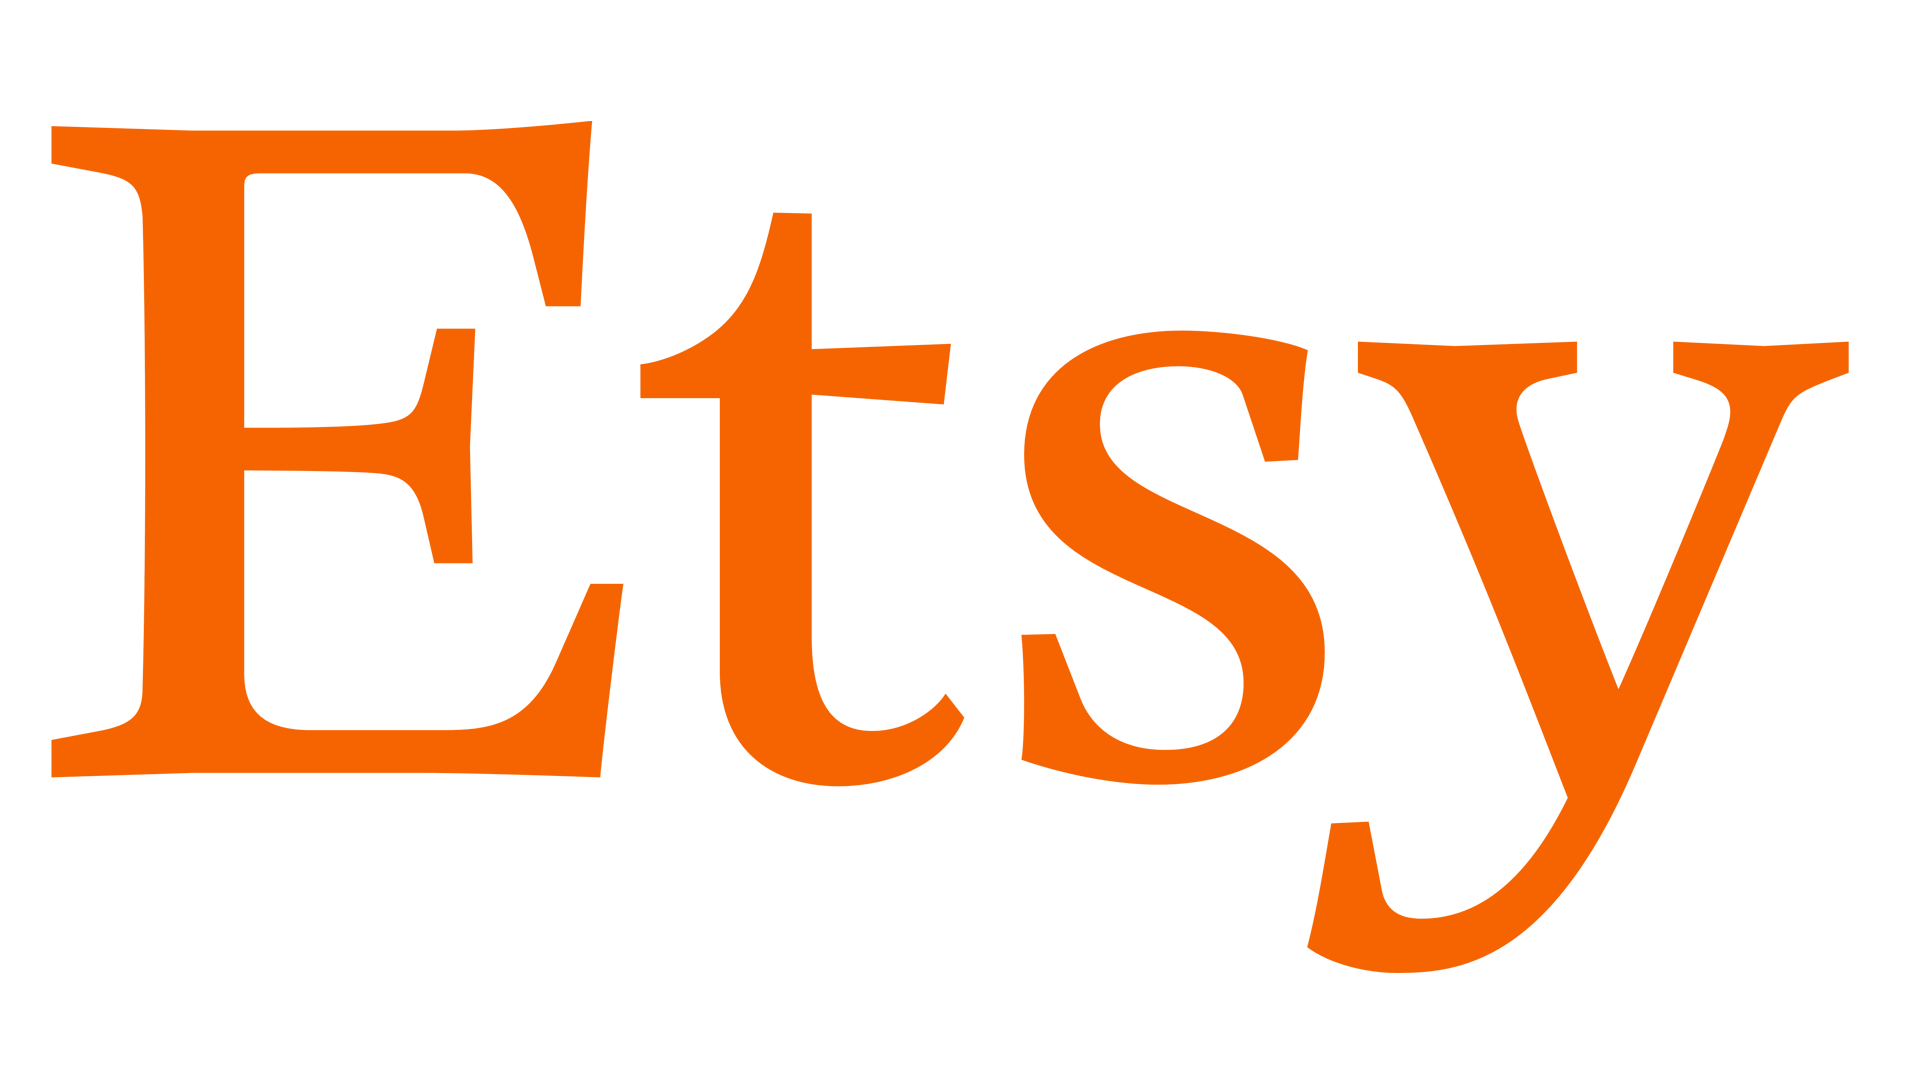 Etsy.png